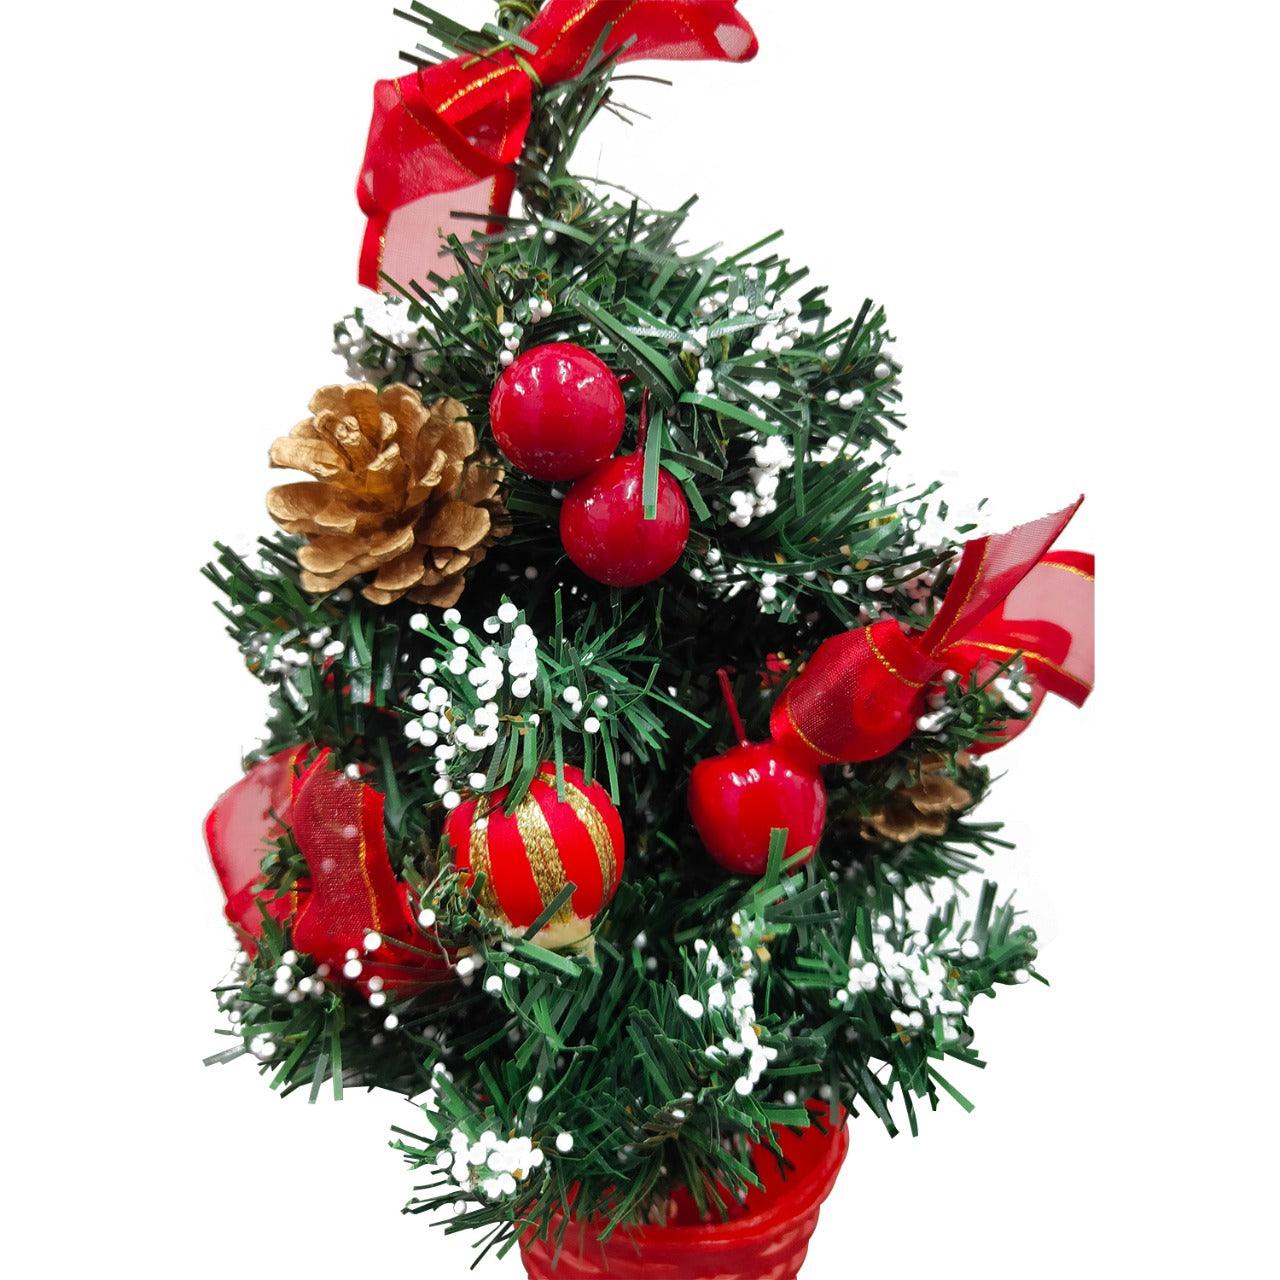 PartyCorp 1 ft Artificial Tabletop Mini Christmas Tree Decor for Office, Room Decor - FunCorp India